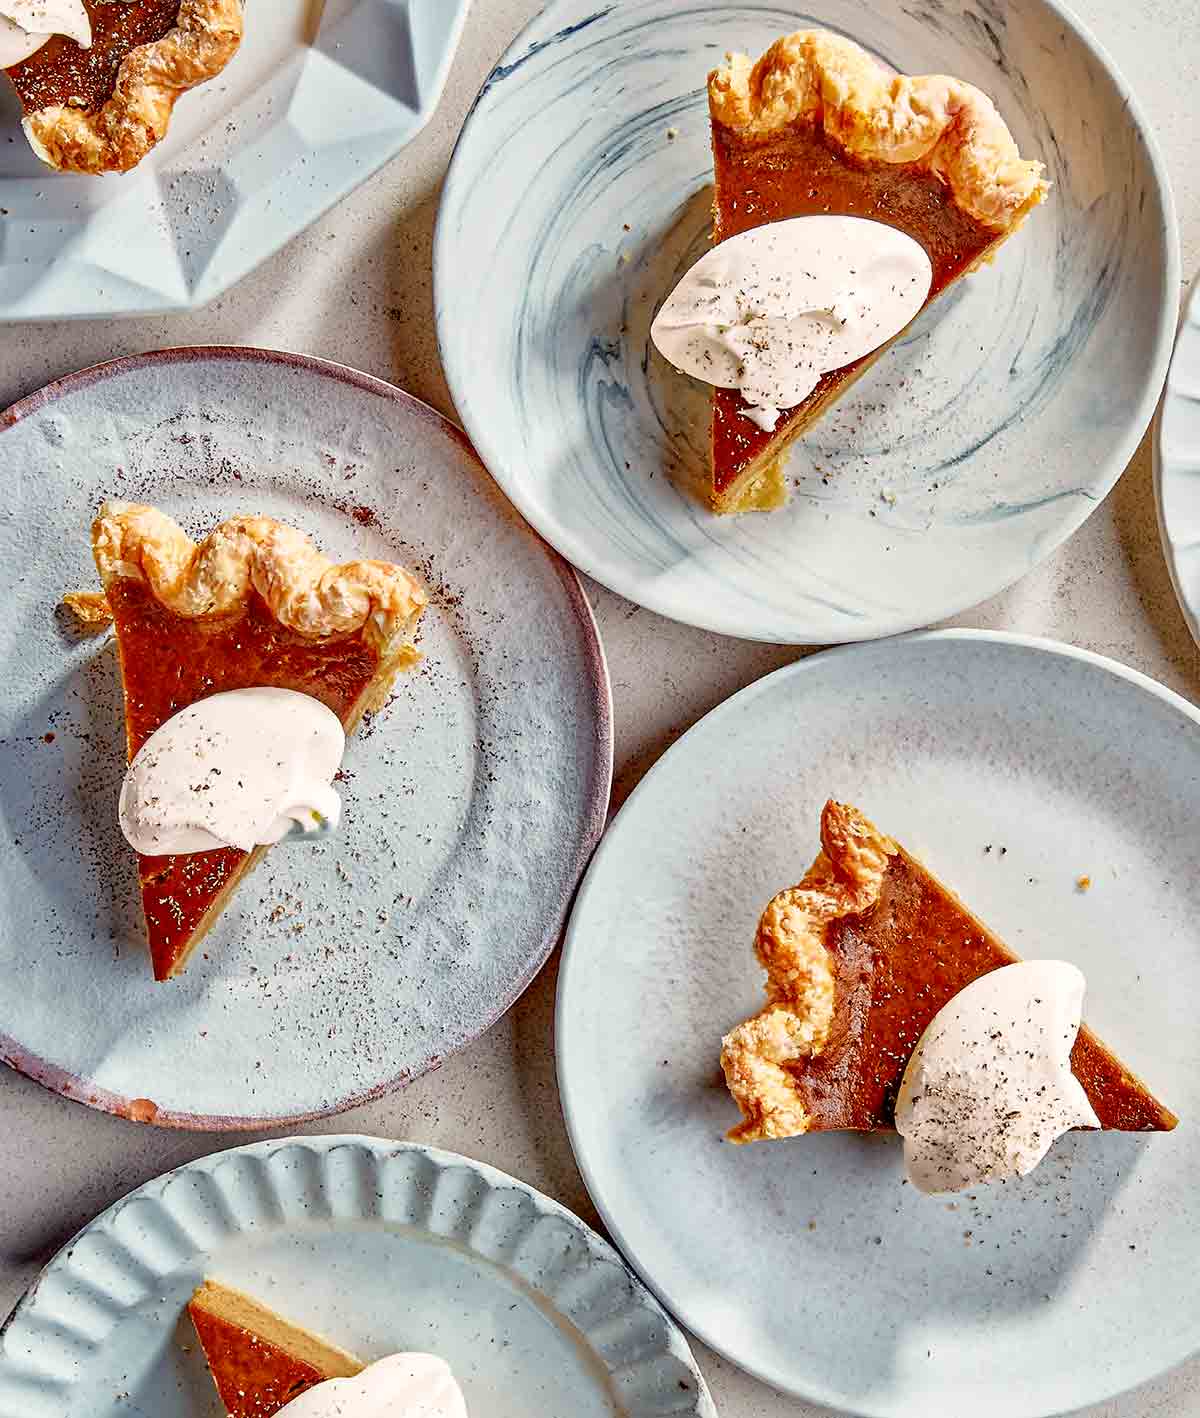 Caramelized honey pumpkin pie in slices on dessert plates, each garnished with dollops of whipped cream and pumpkin pie spice.